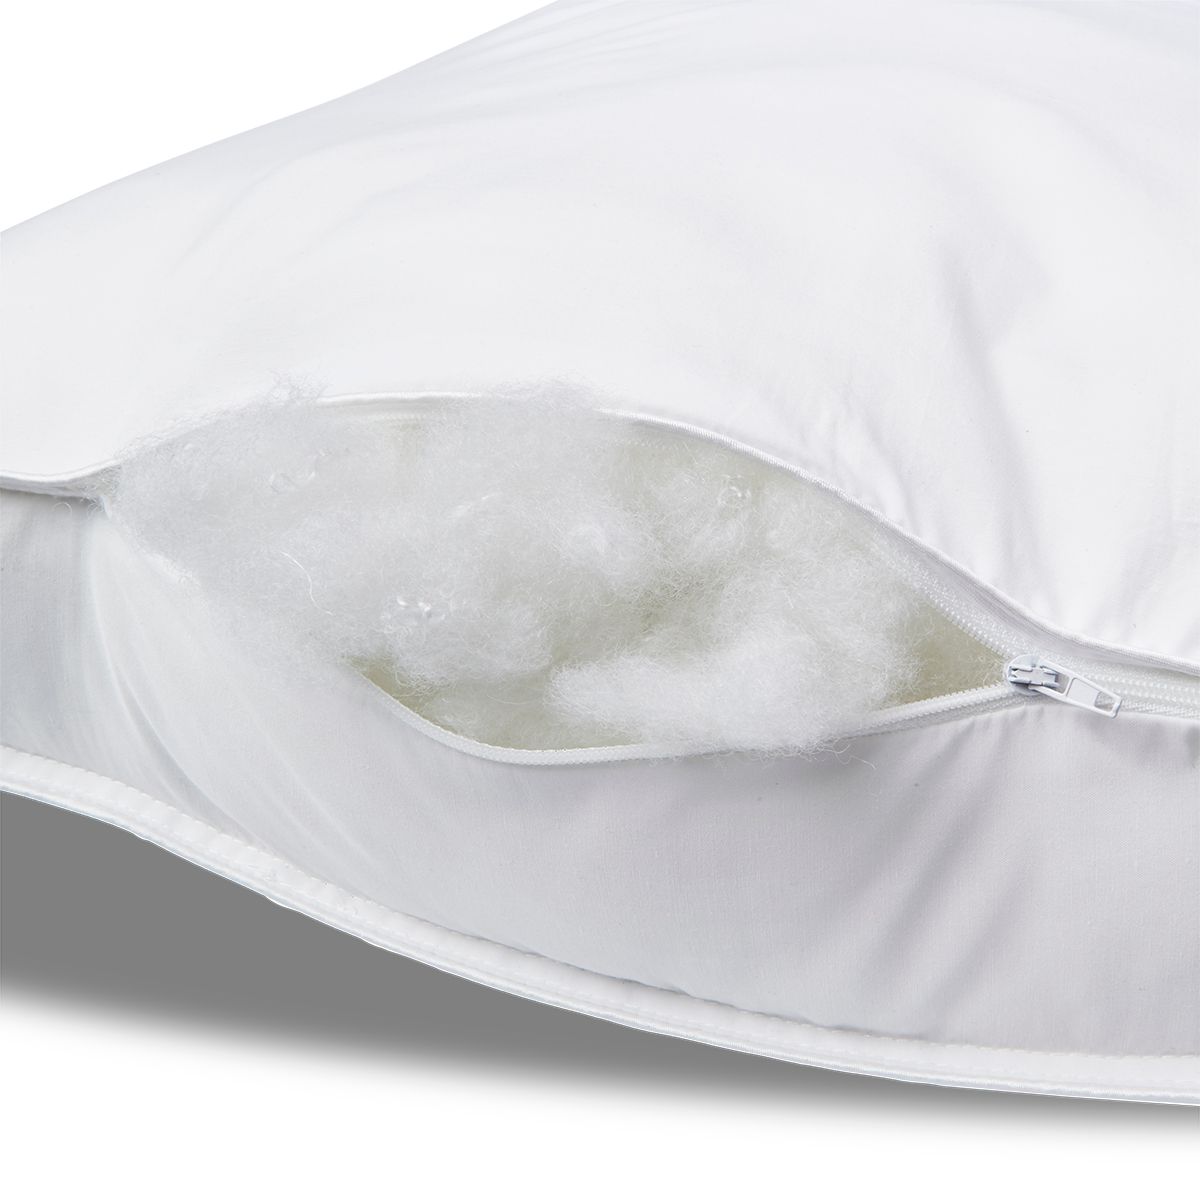 dunimed premium pillow inside material pictured